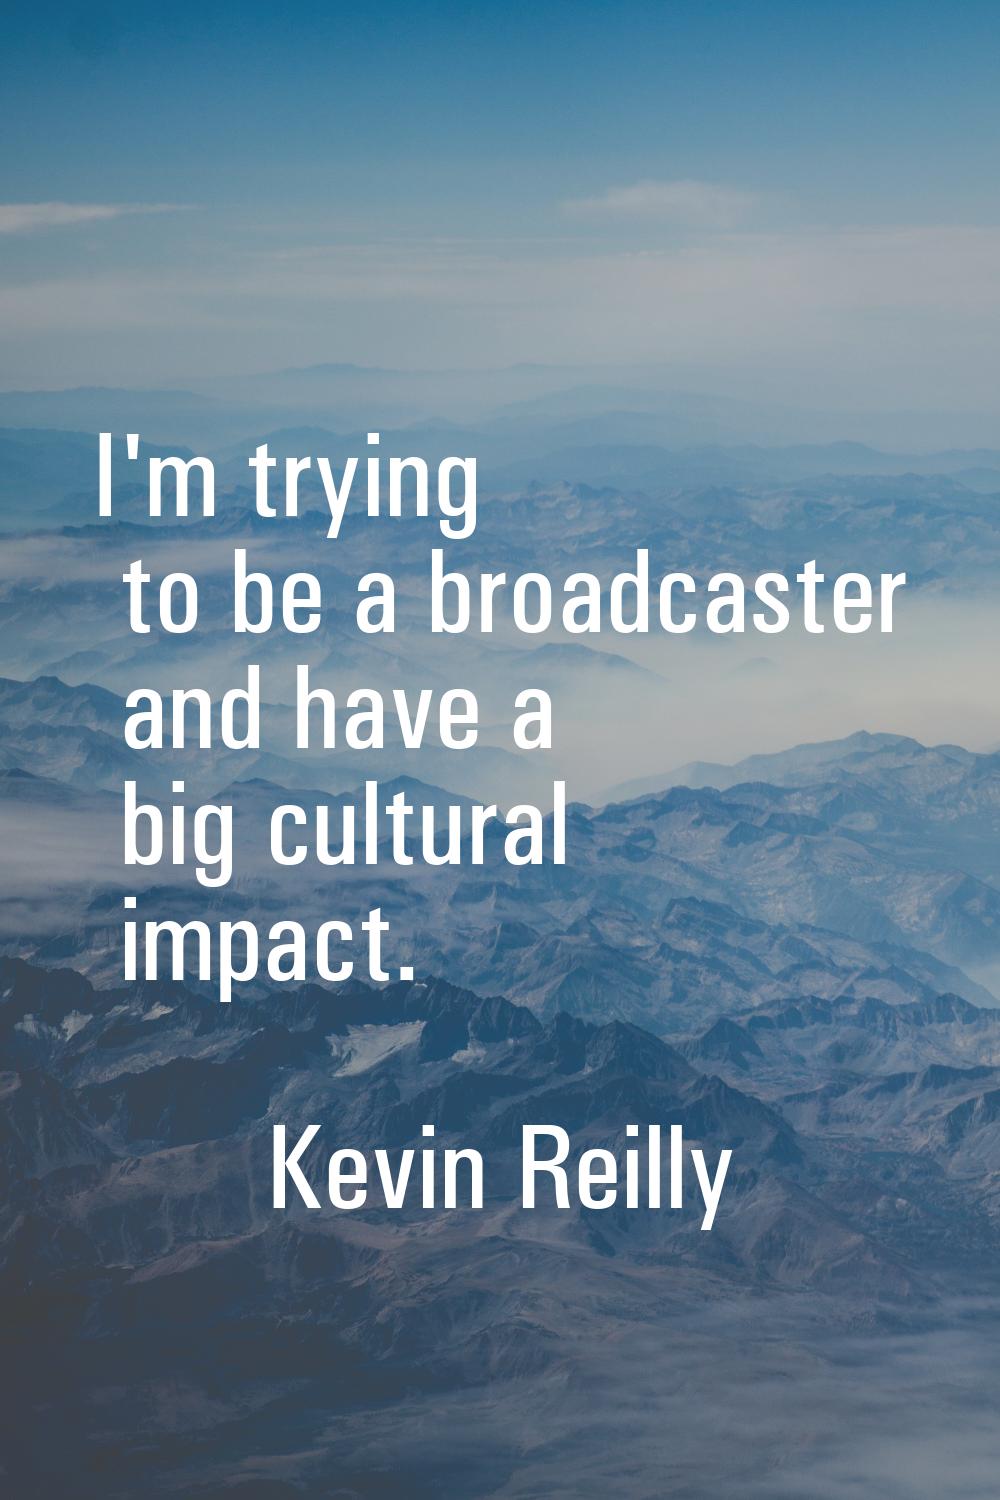 I'm trying to be a broadcaster and have a big cultural impact.